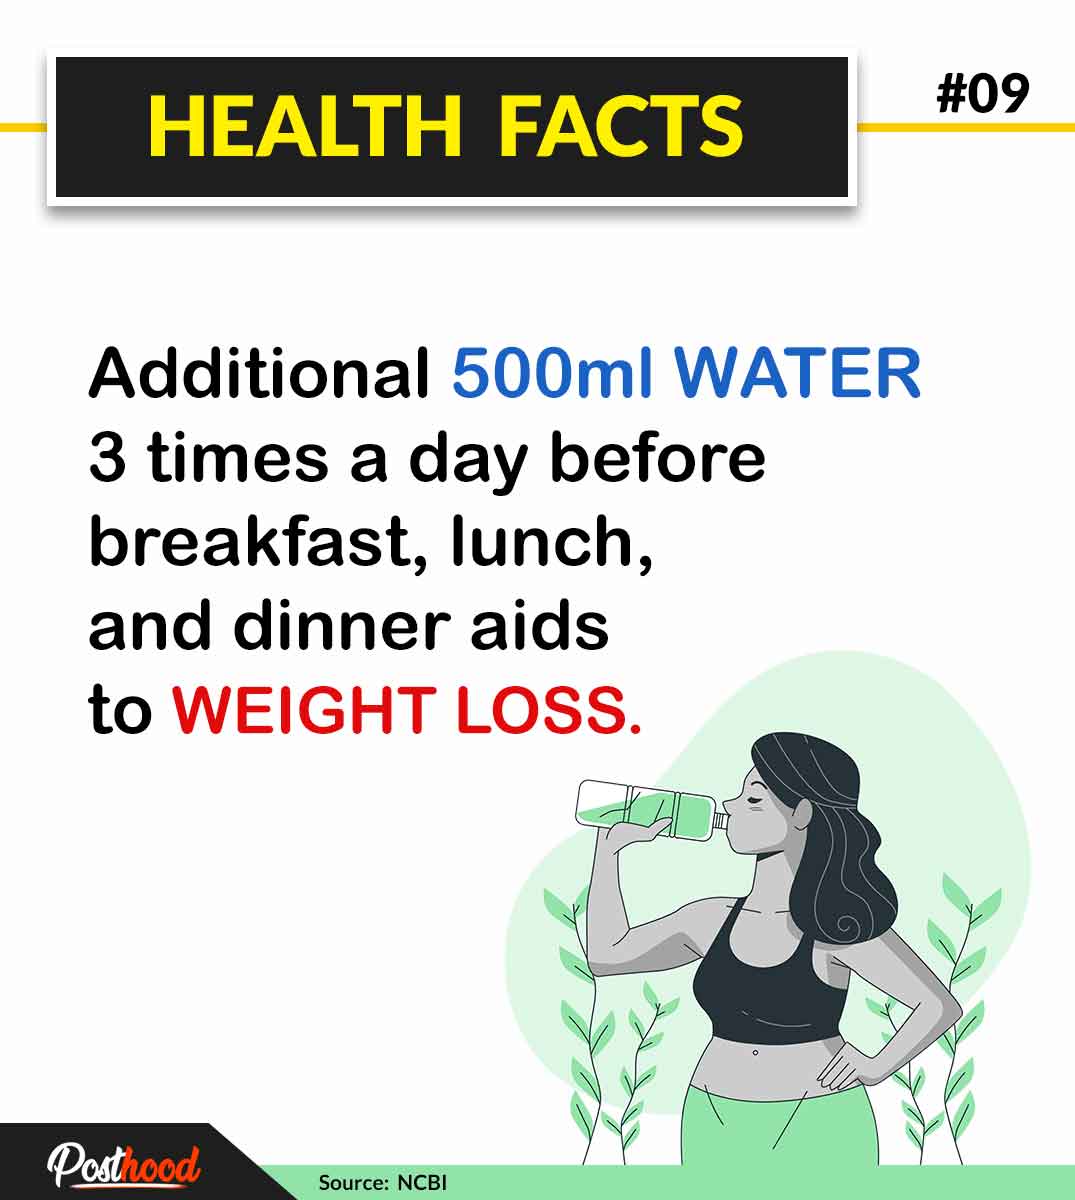 Trying to lose some weight? Read on these amazing science-based health facts about weight loss and water. Interesting health facts you must know if on weight loss.